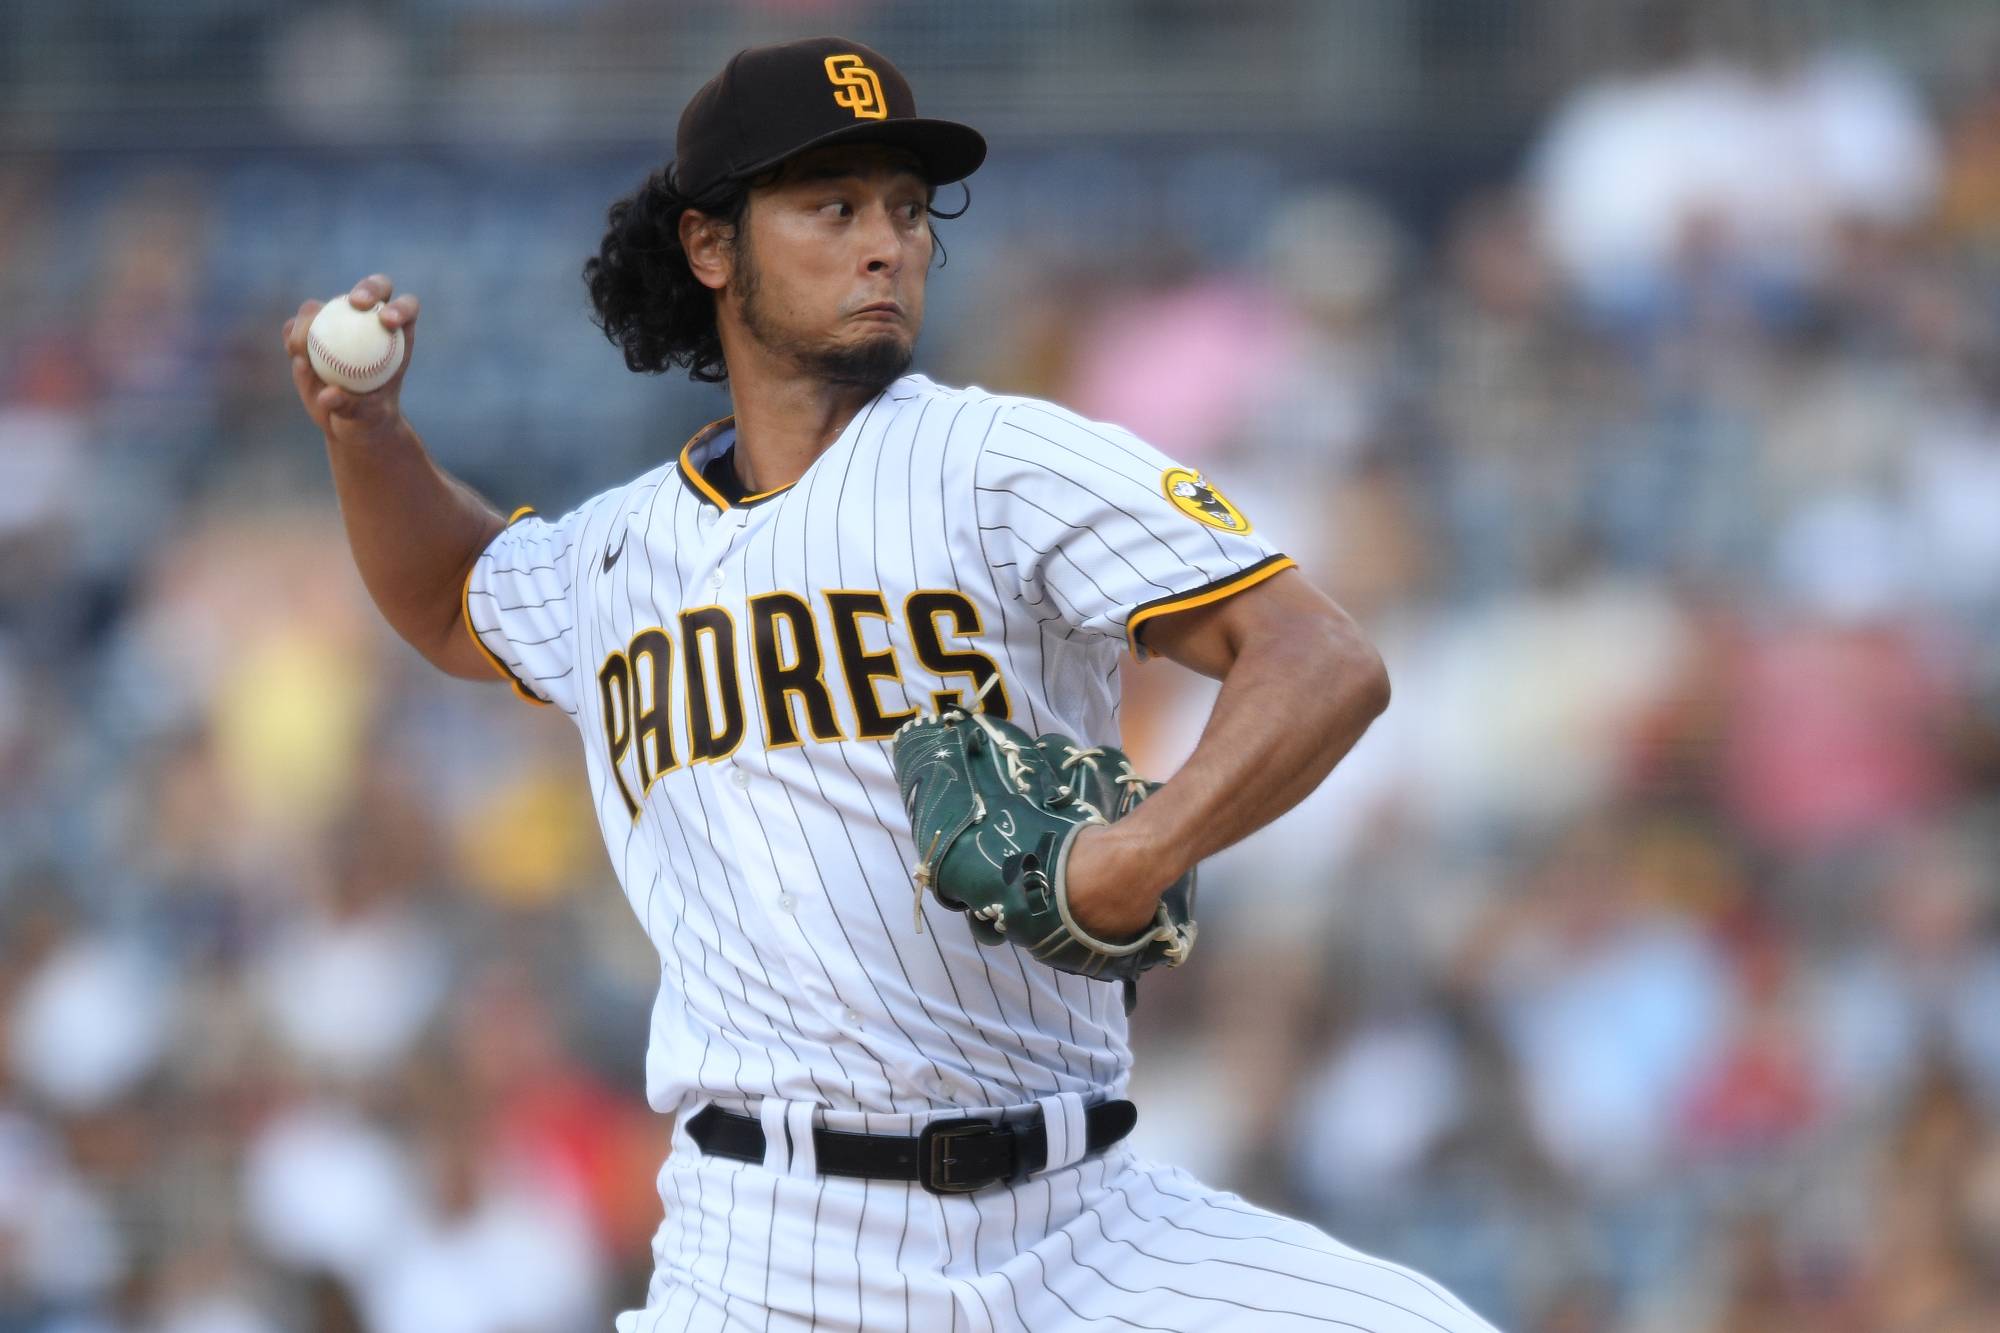 Padres starter Yu Darvish pitches against the Angels in San Diego on Wednesday. | USA TODAY / VIA REUTERS